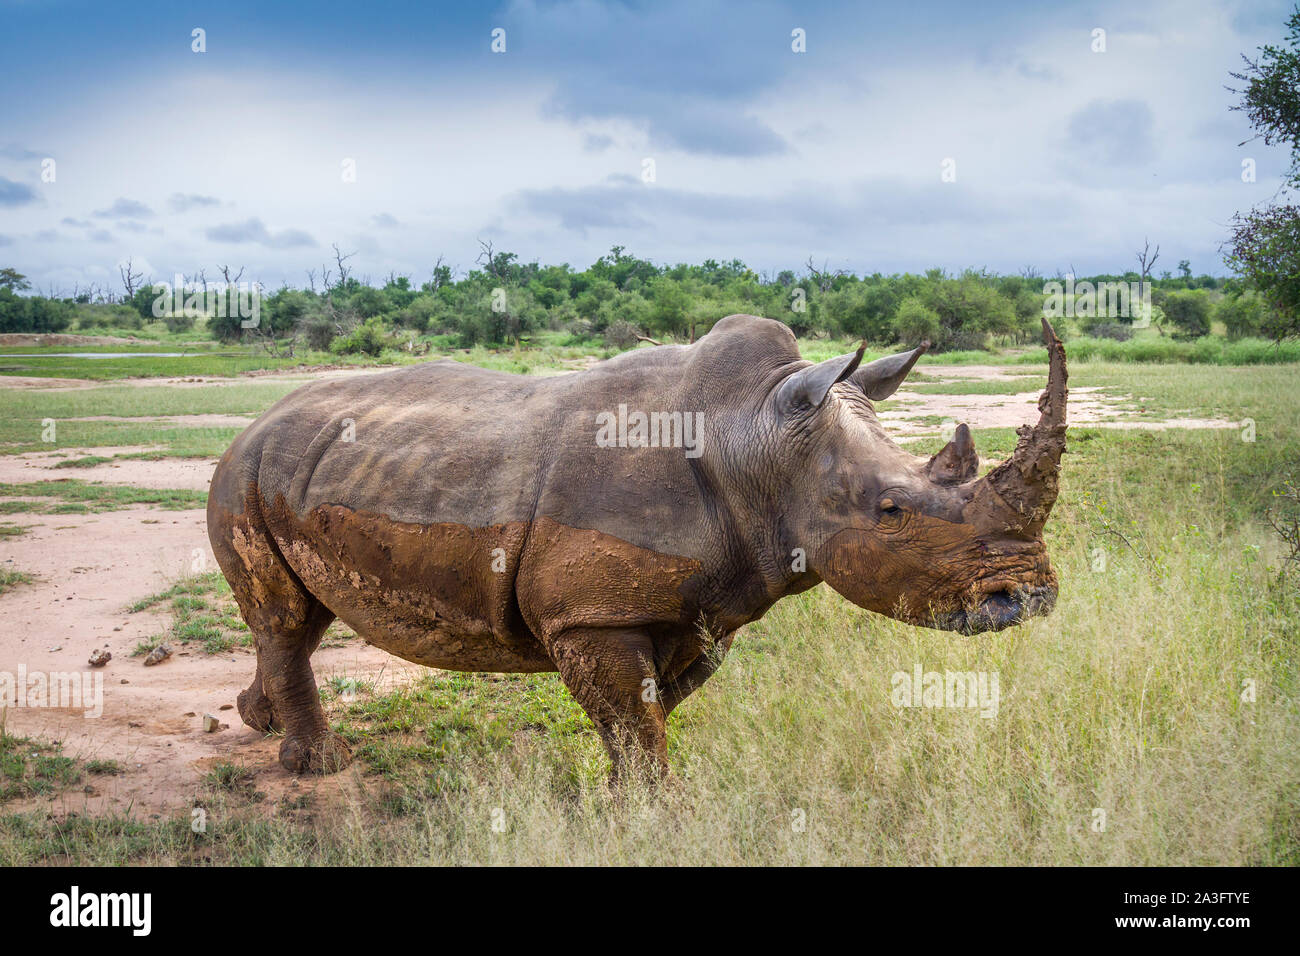 Southern white rhinoceros in wide angle view in Hlane royal National park, Swaziland ; Specie Ceratotherium simum simum family of Rhinocerotidae Stock Photo